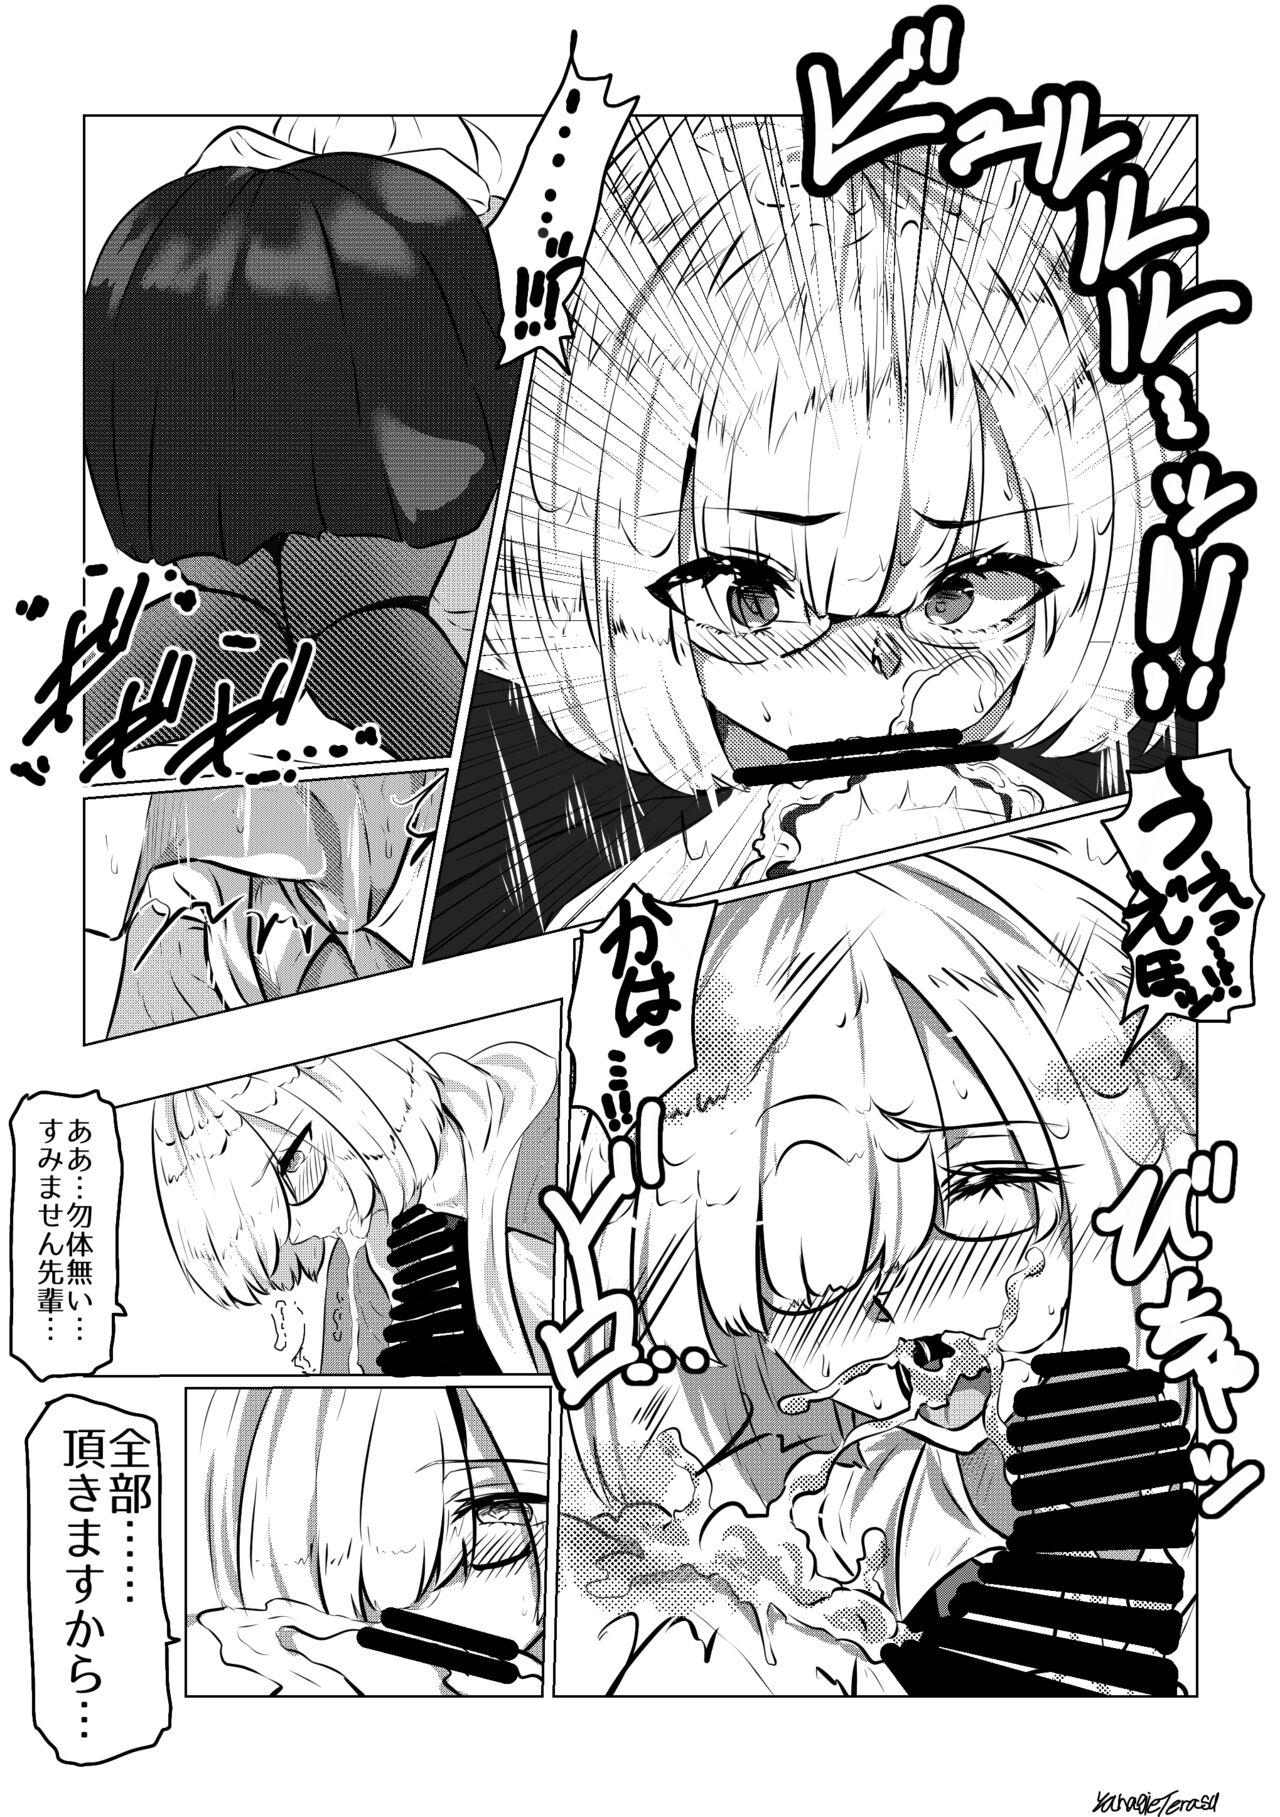 Passionate マシュの早朝ご奉仕 - Fate grand order Amatuer Porn - Page 3